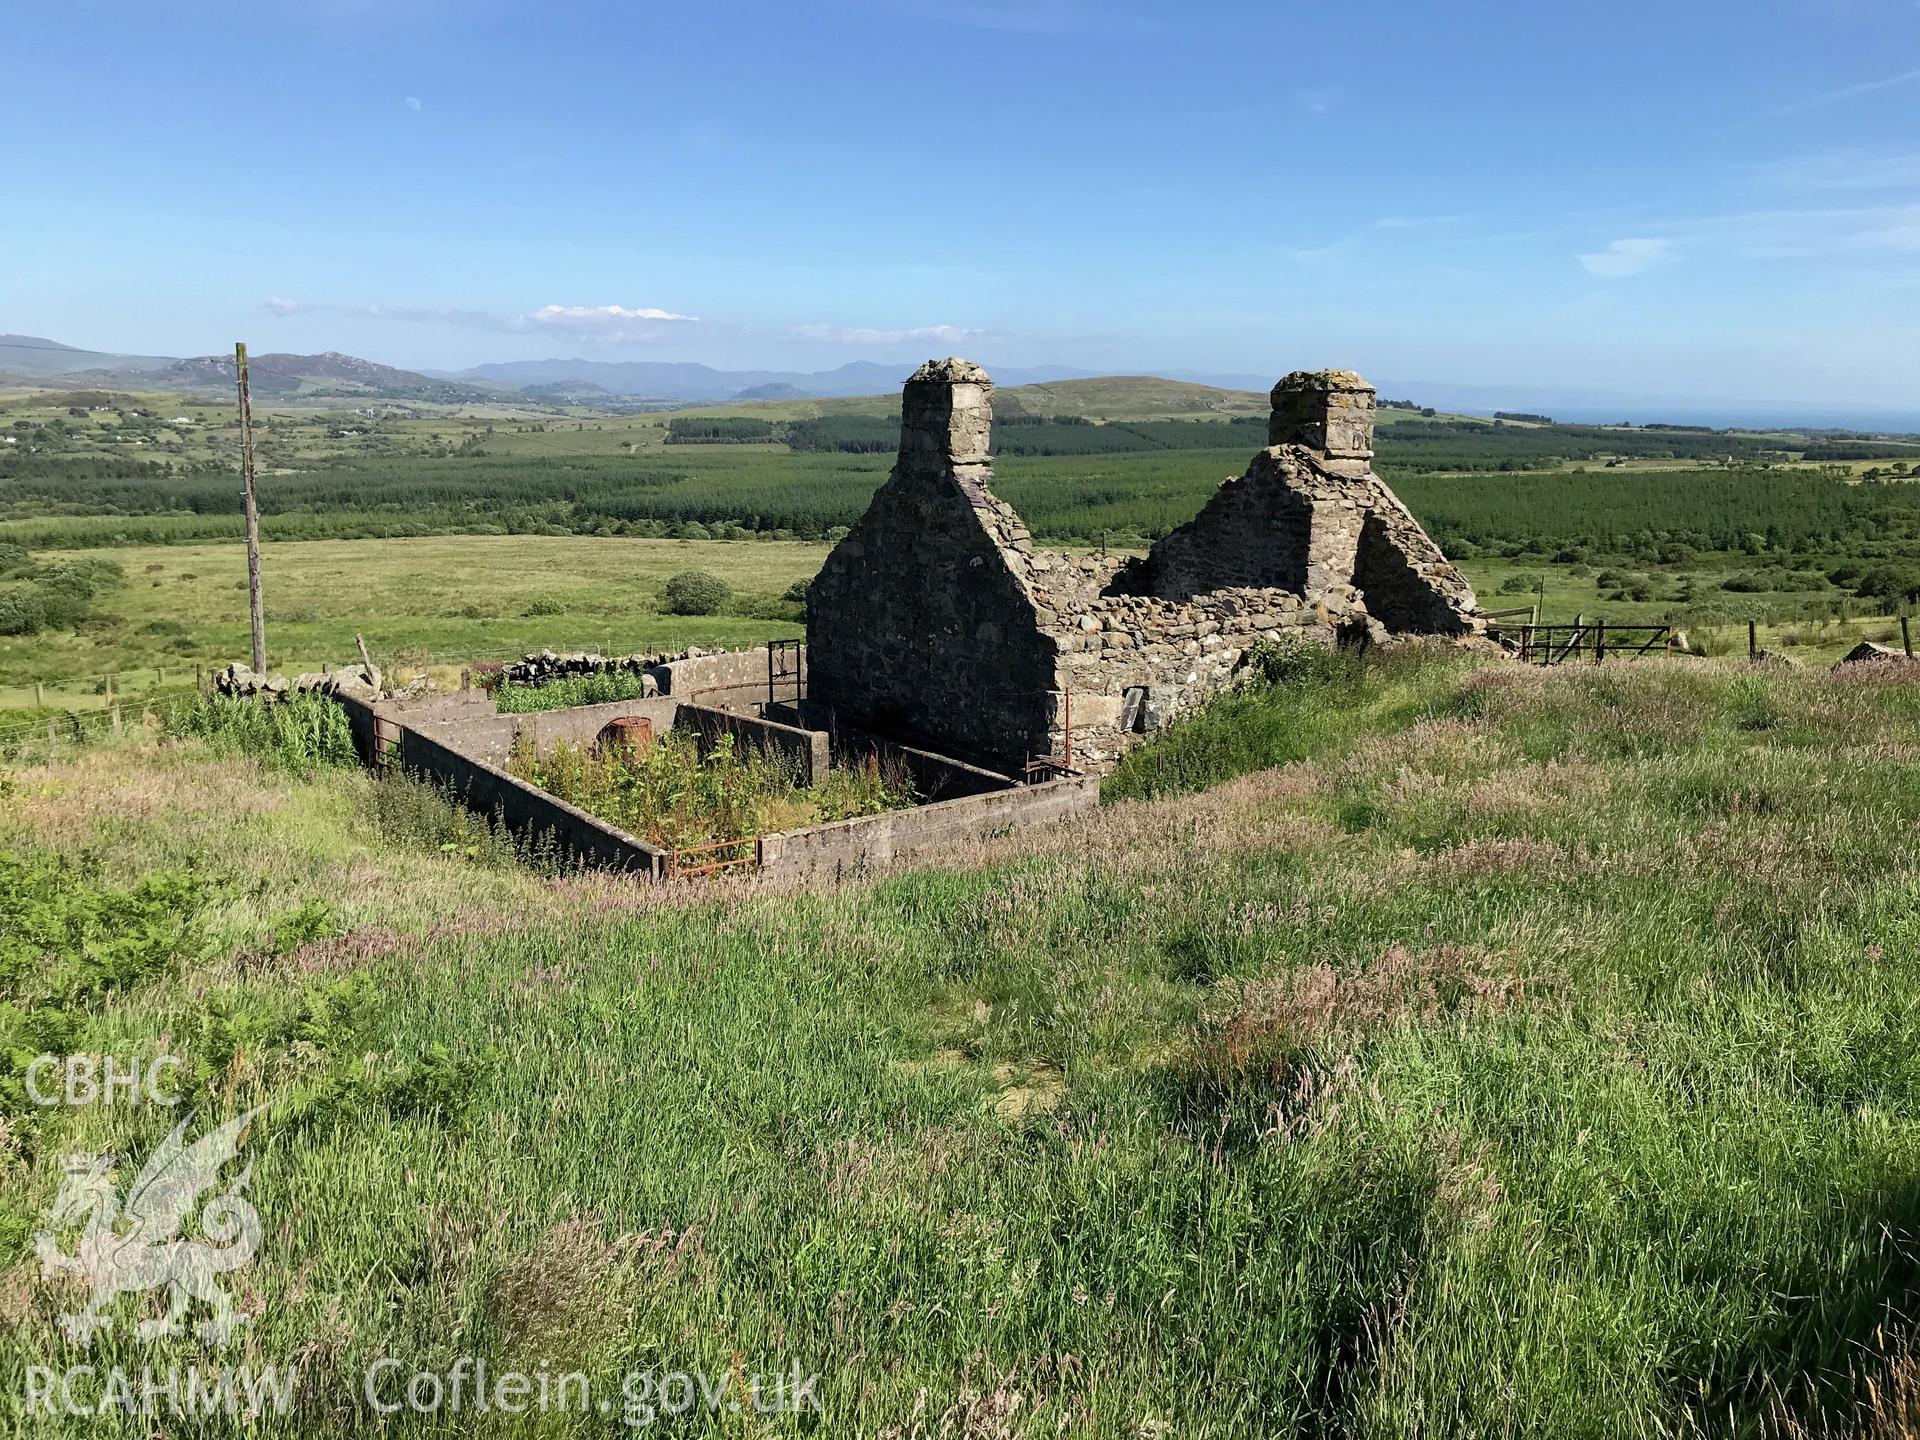 Colour photo showing view of Cae-Hir-Isaf house in it's setting, taken by Paul R. Davis, 22nd June 2018.